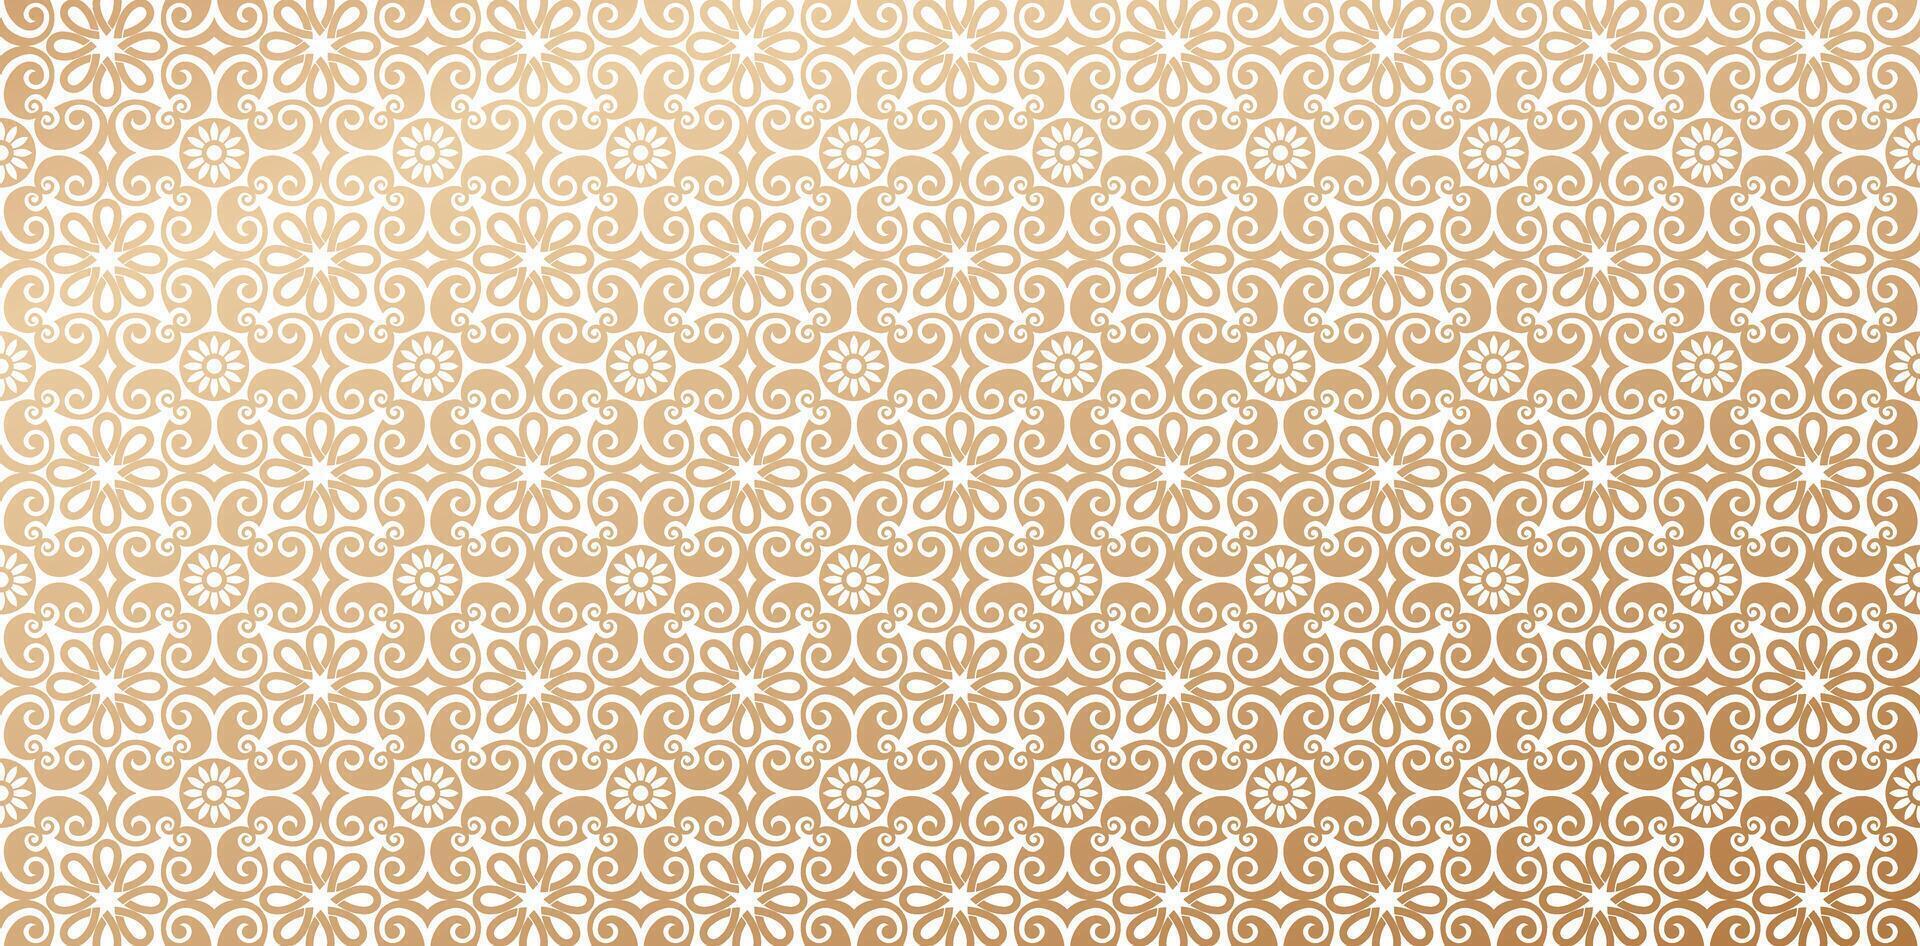 pattern islamic styles ornament gold colors damask wallpaper vintage background for Fashionable modern wallpaper or textiles, books cover, Digital interfaces, print designs template materials vector